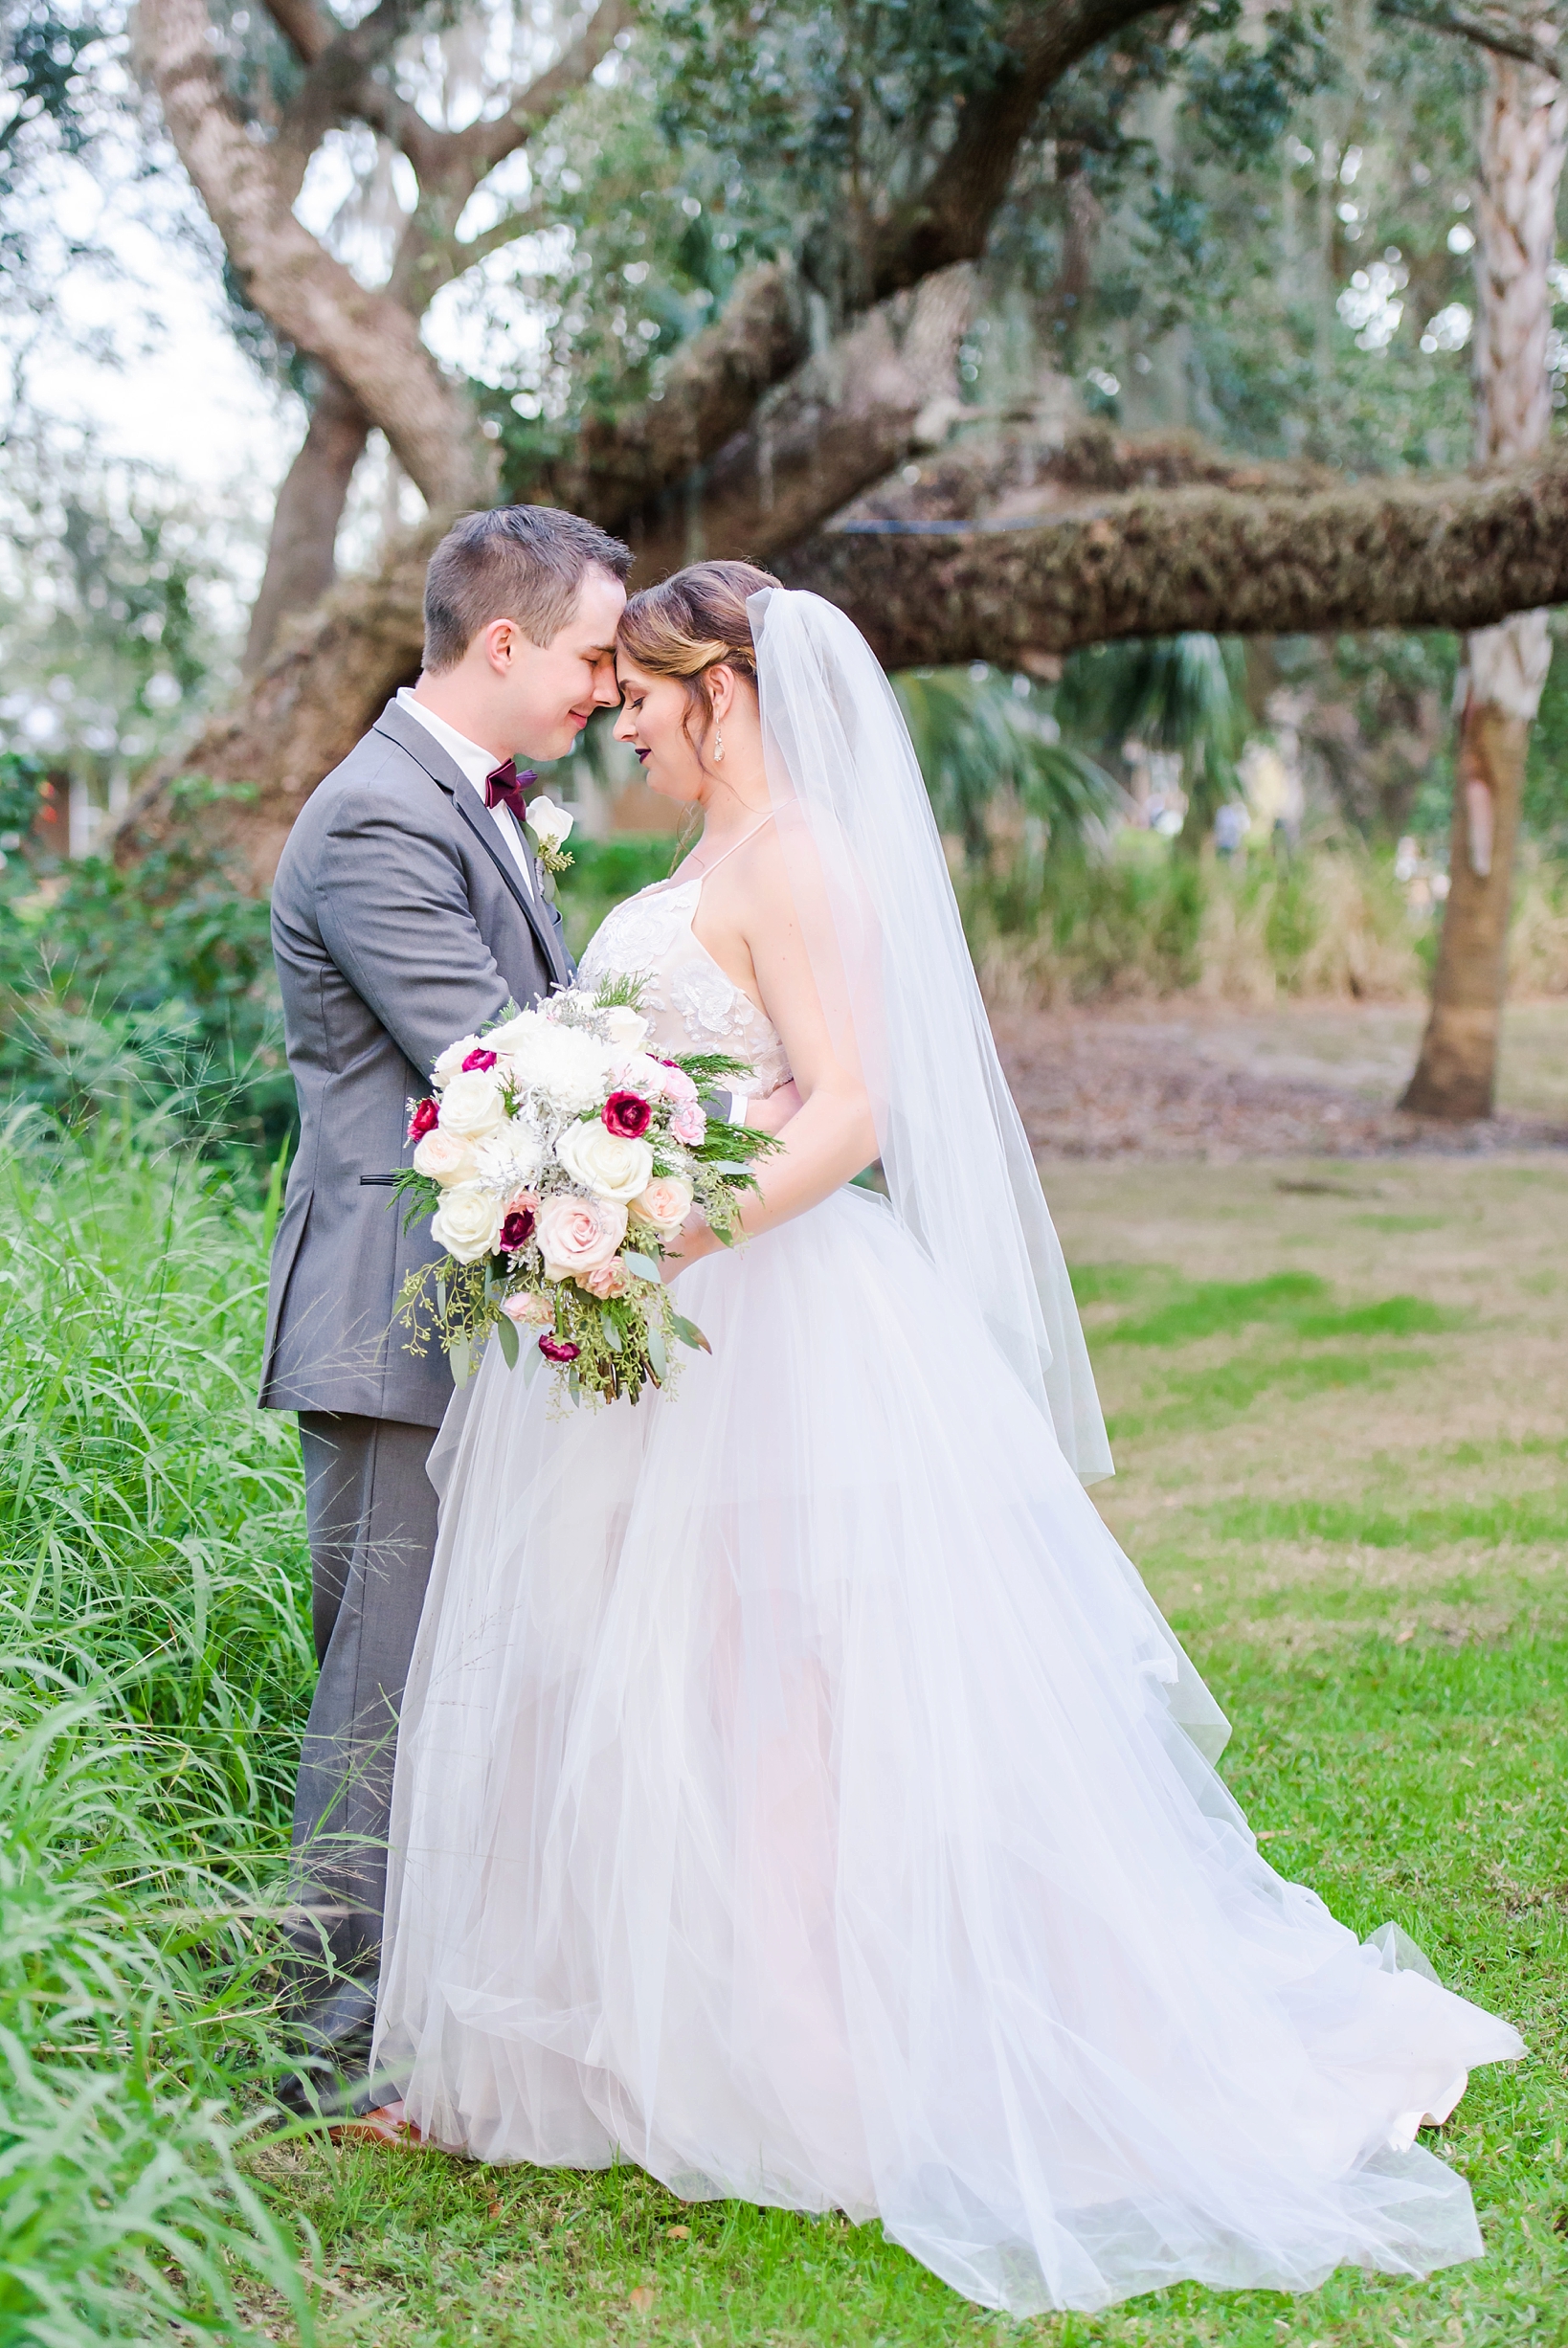 Bride and Groom in a rustic ranch setting